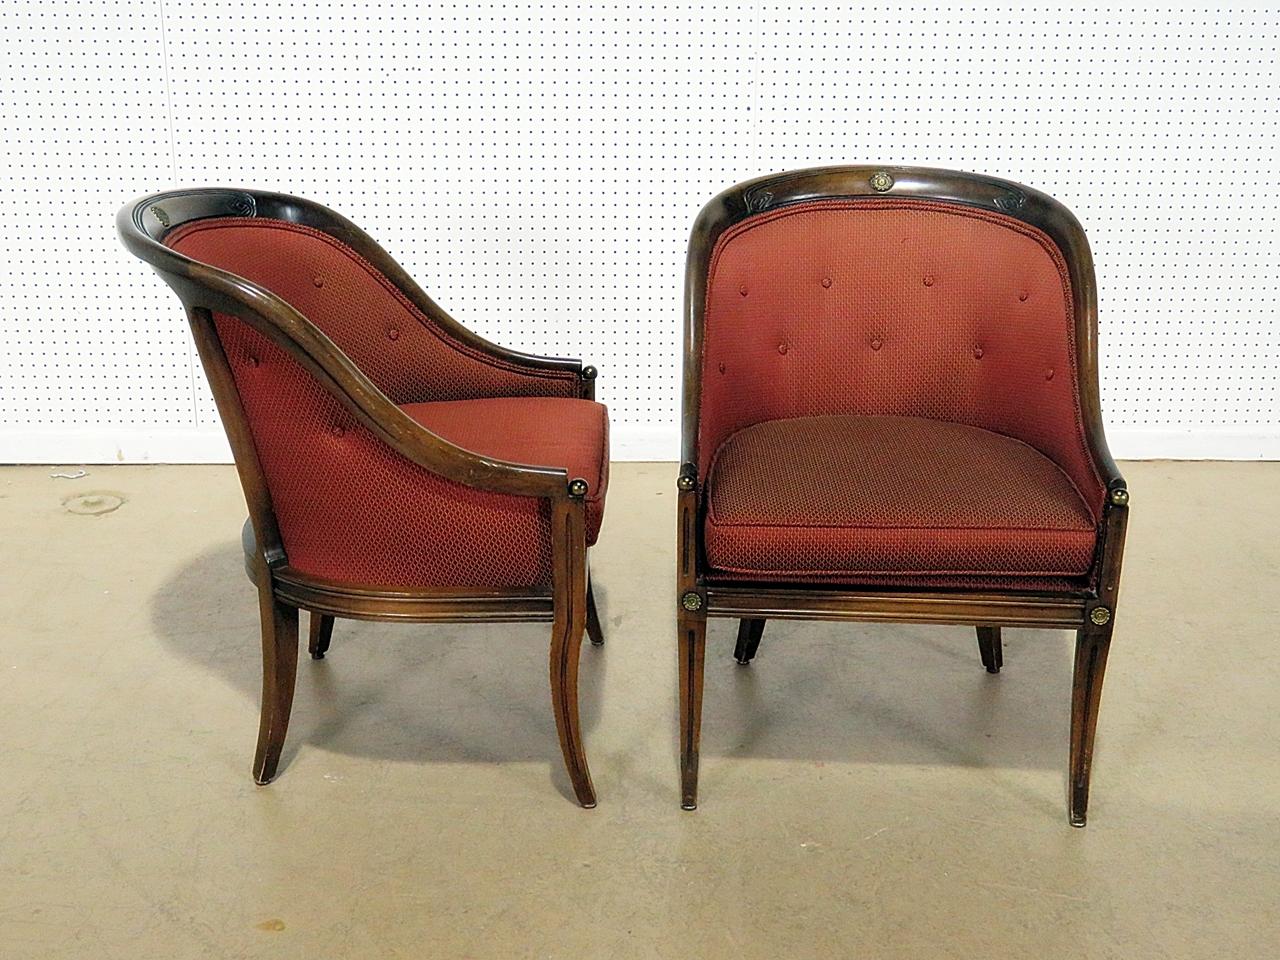 Pair of Regency style club chairs with metal accents.